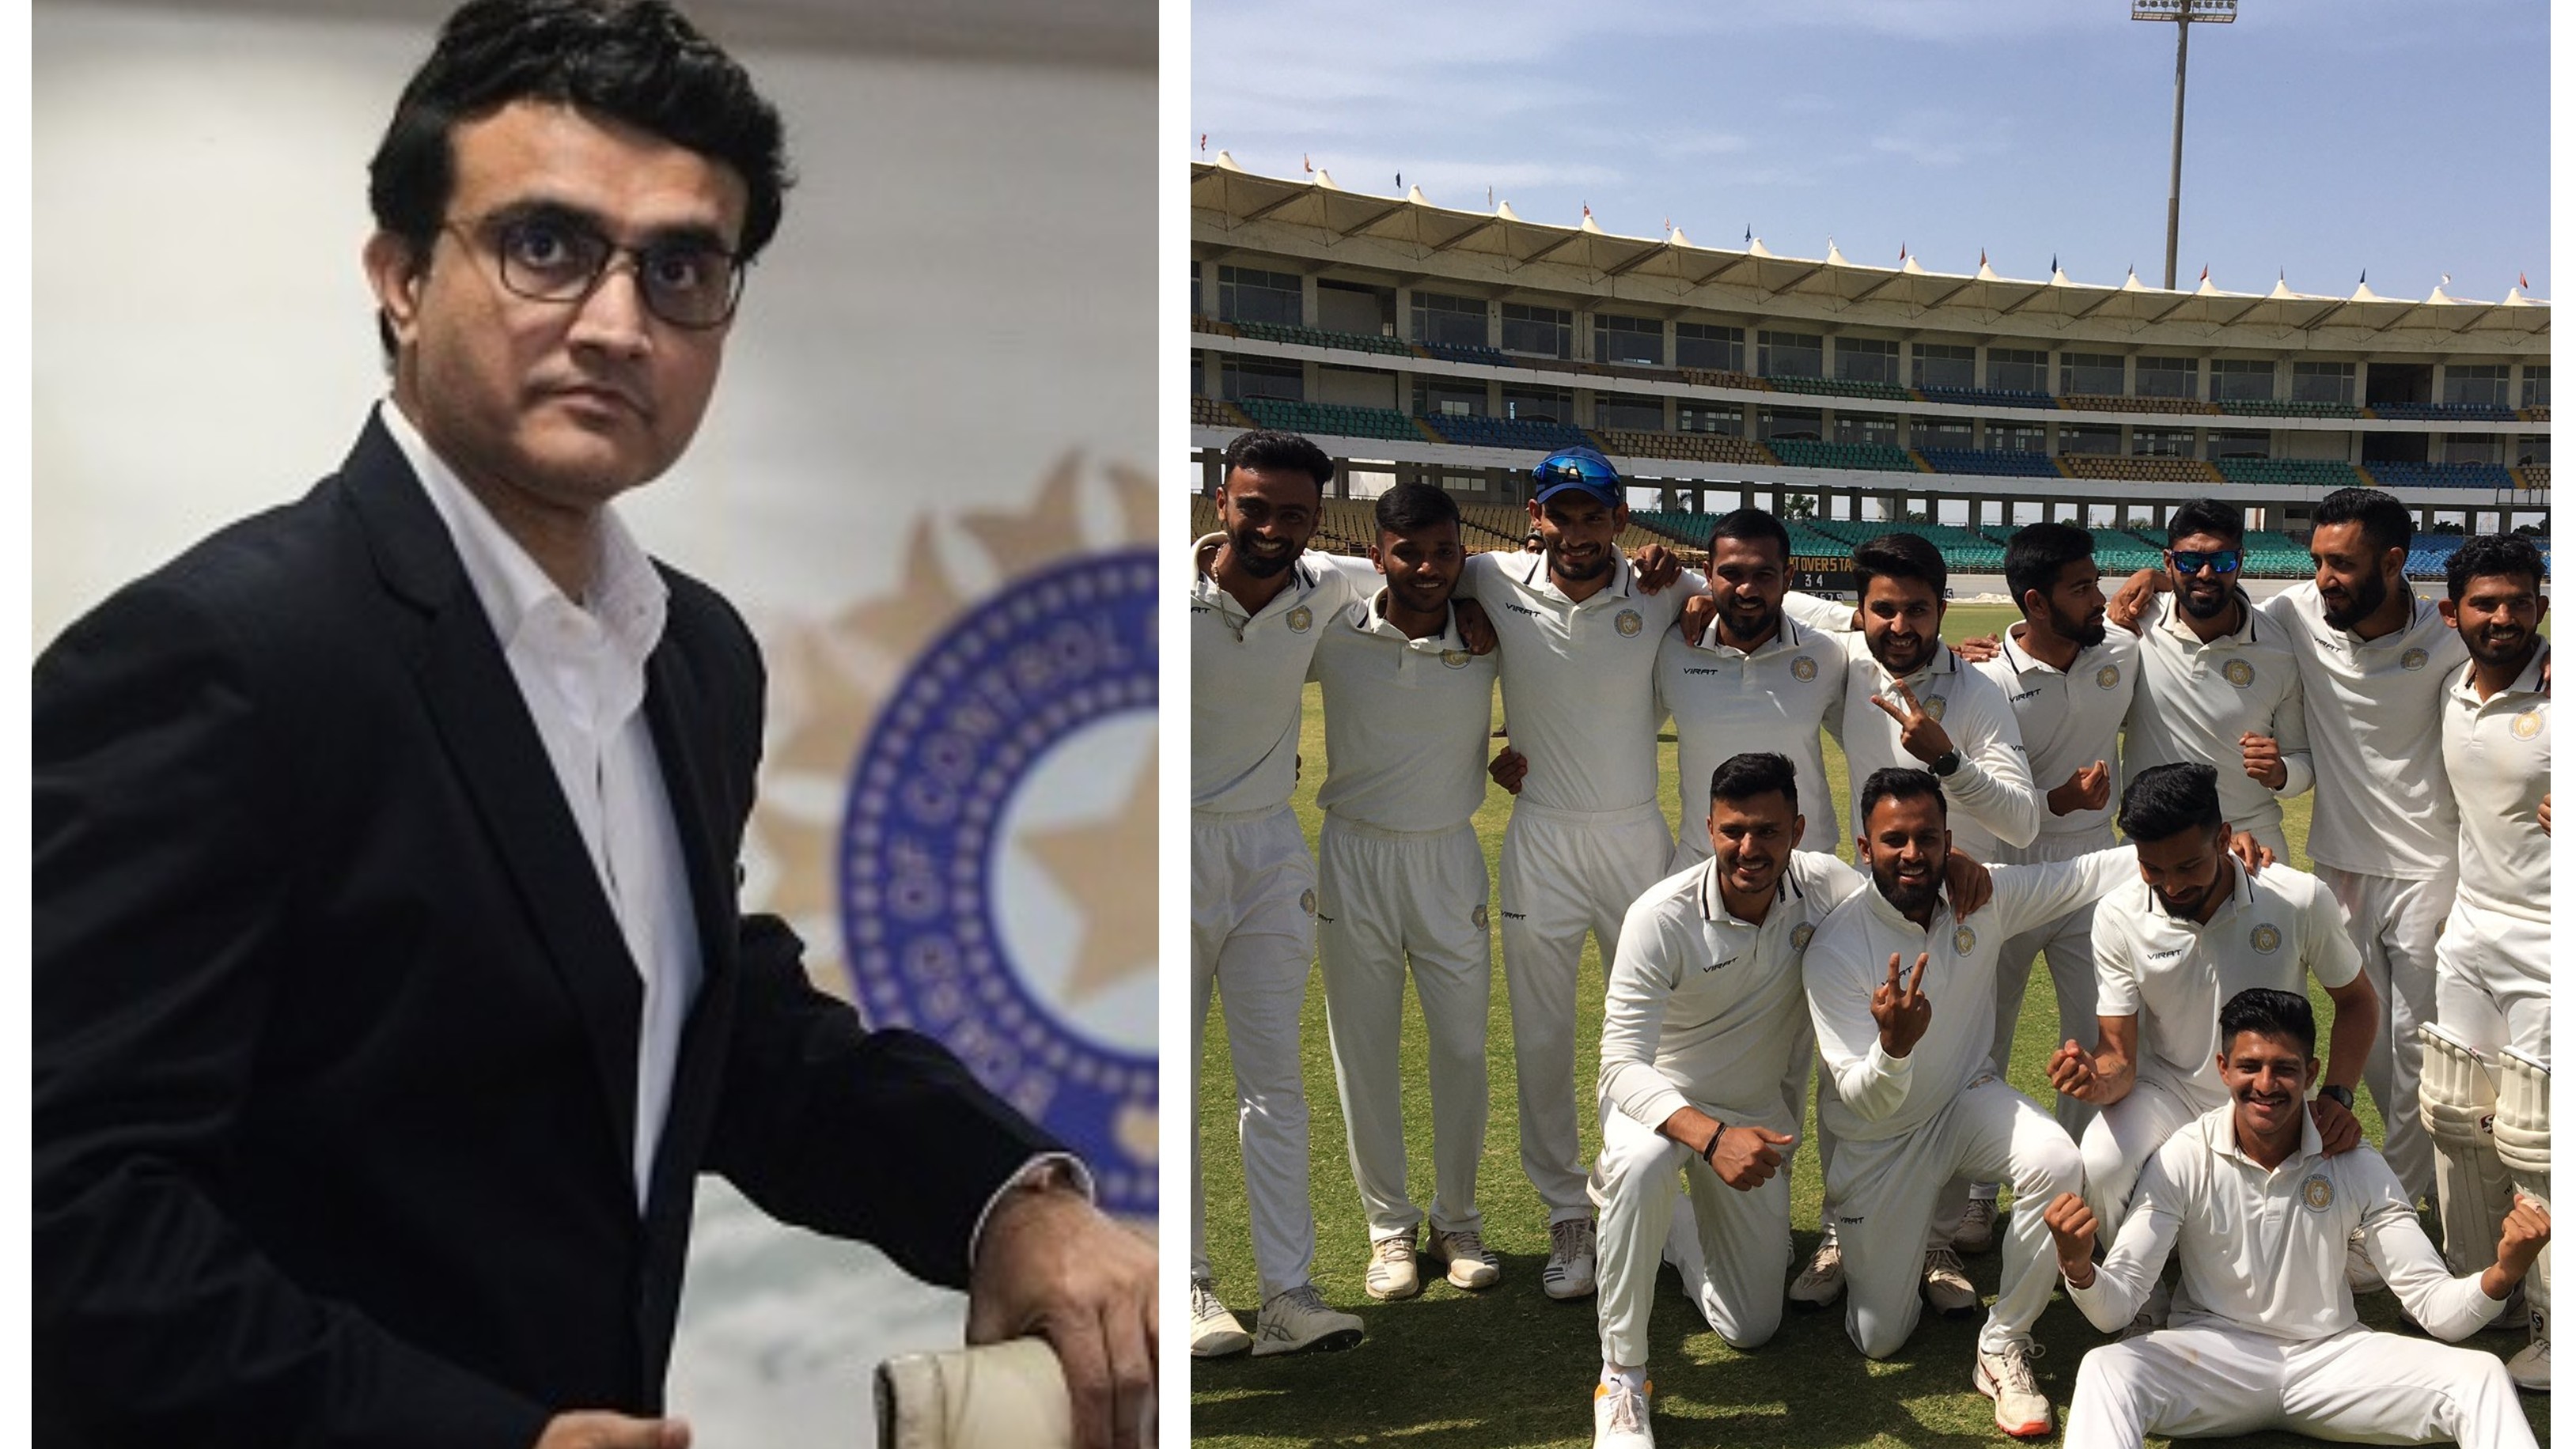 ‘We have tentatively decided to start domestic cricket from January 1, 2021’: BCCI chief Sourav Ganguly